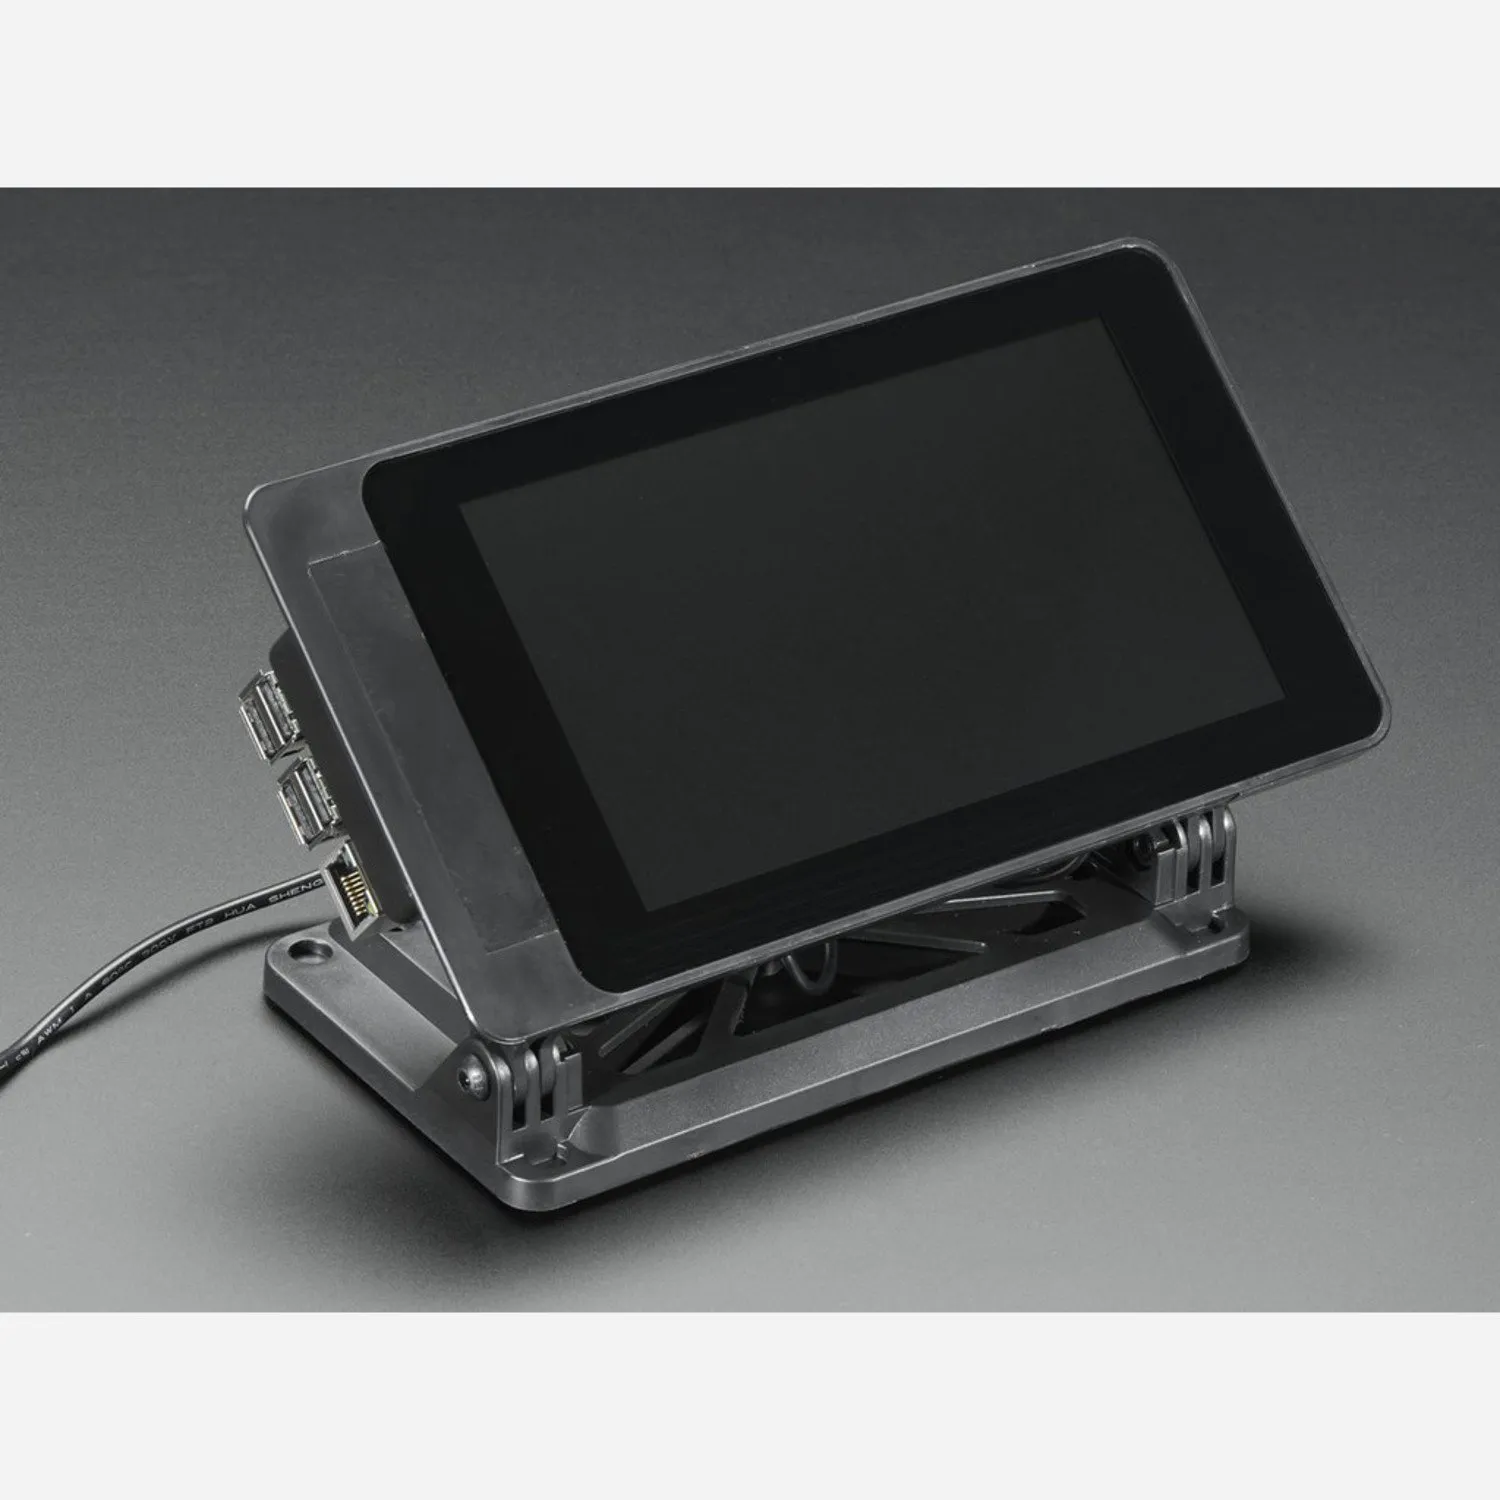 Photo of SmartiPi Touch - Stand for Raspberry Pi 7 Touchscreen Display